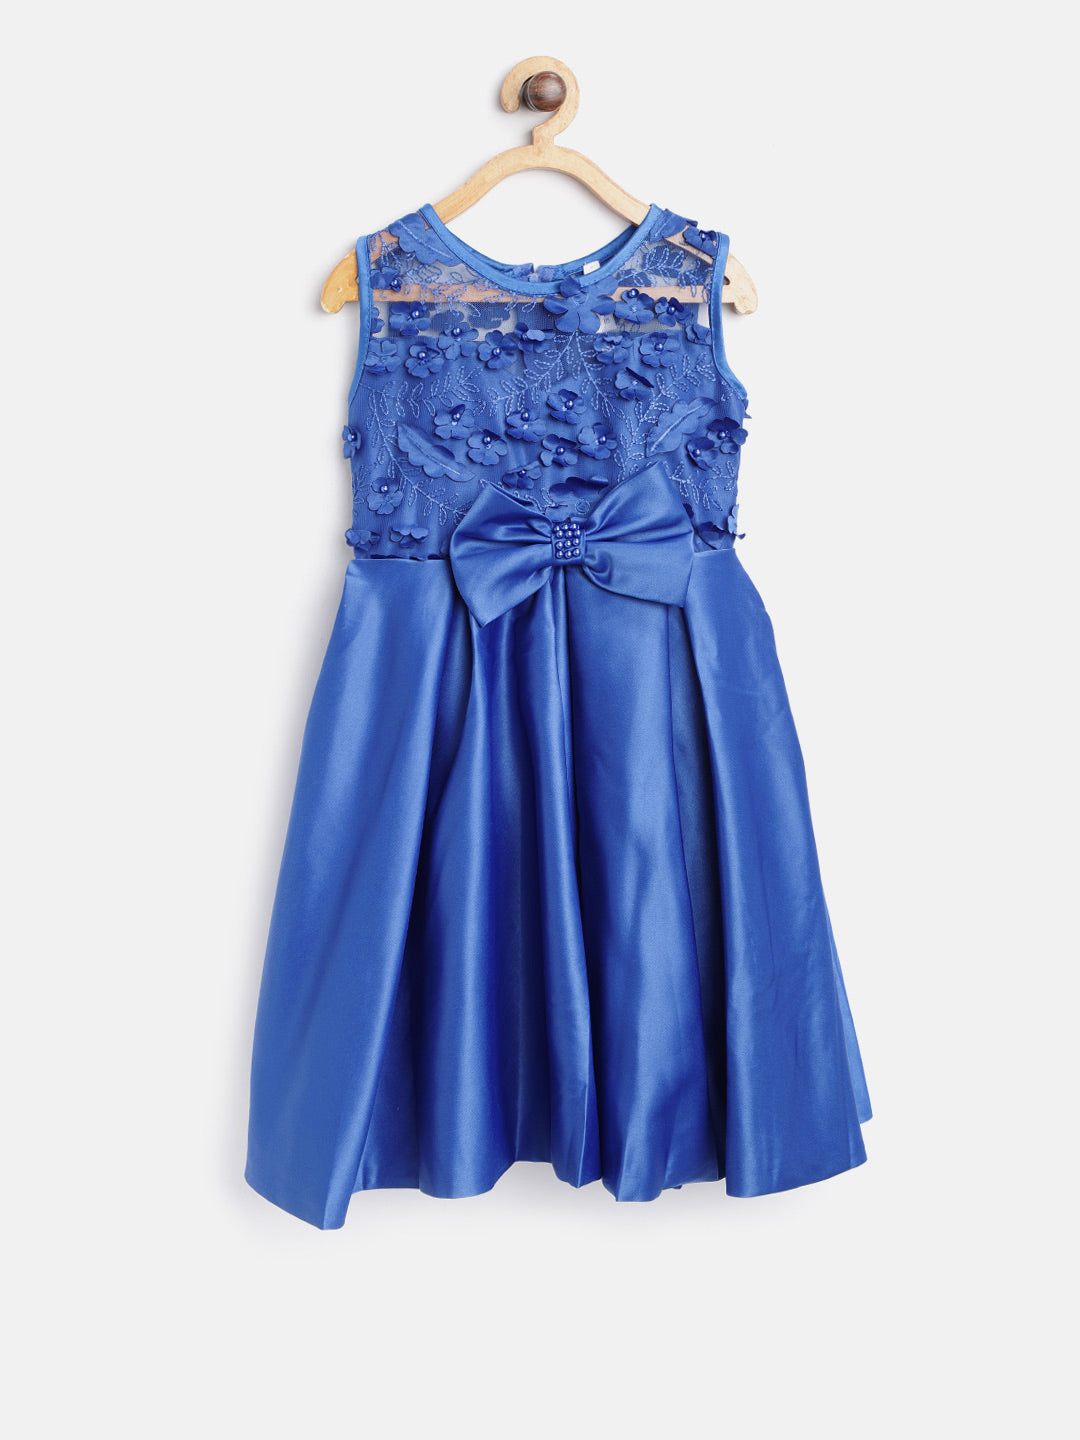 Girls Blue Pearls and embroidered Party Dress